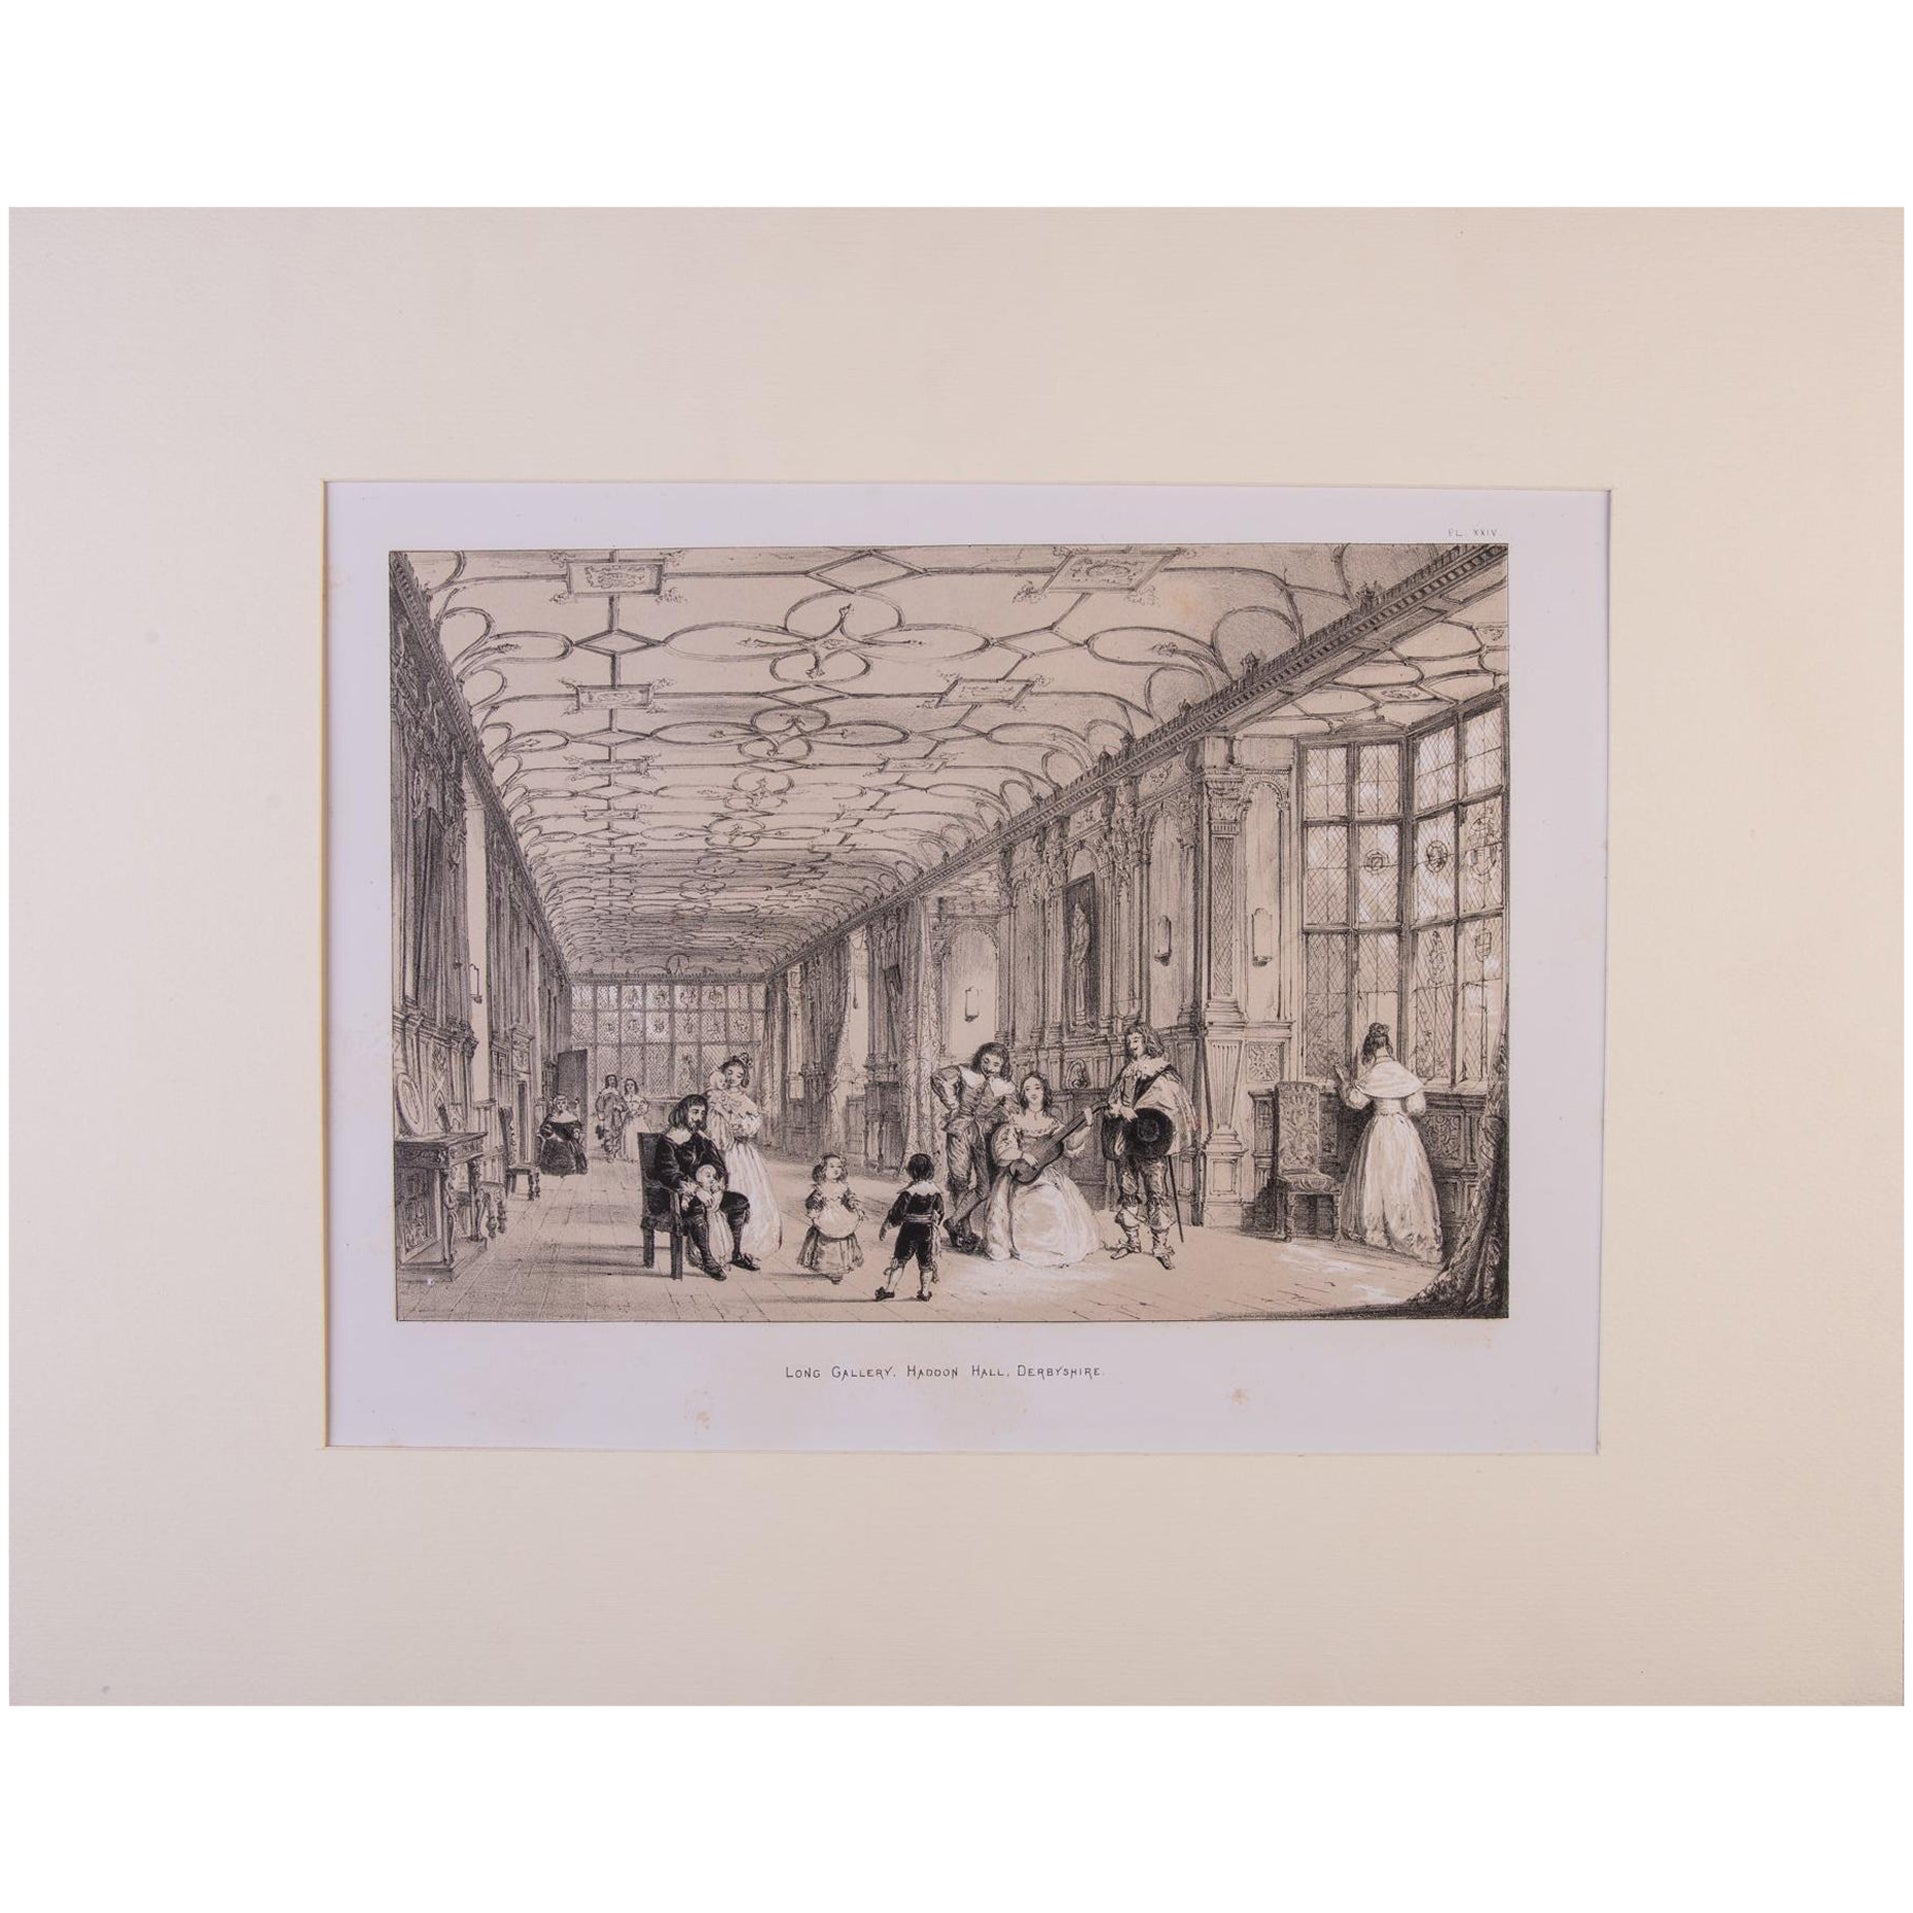 Long Gallery - Haddon Hall - Derbyshire For Sale